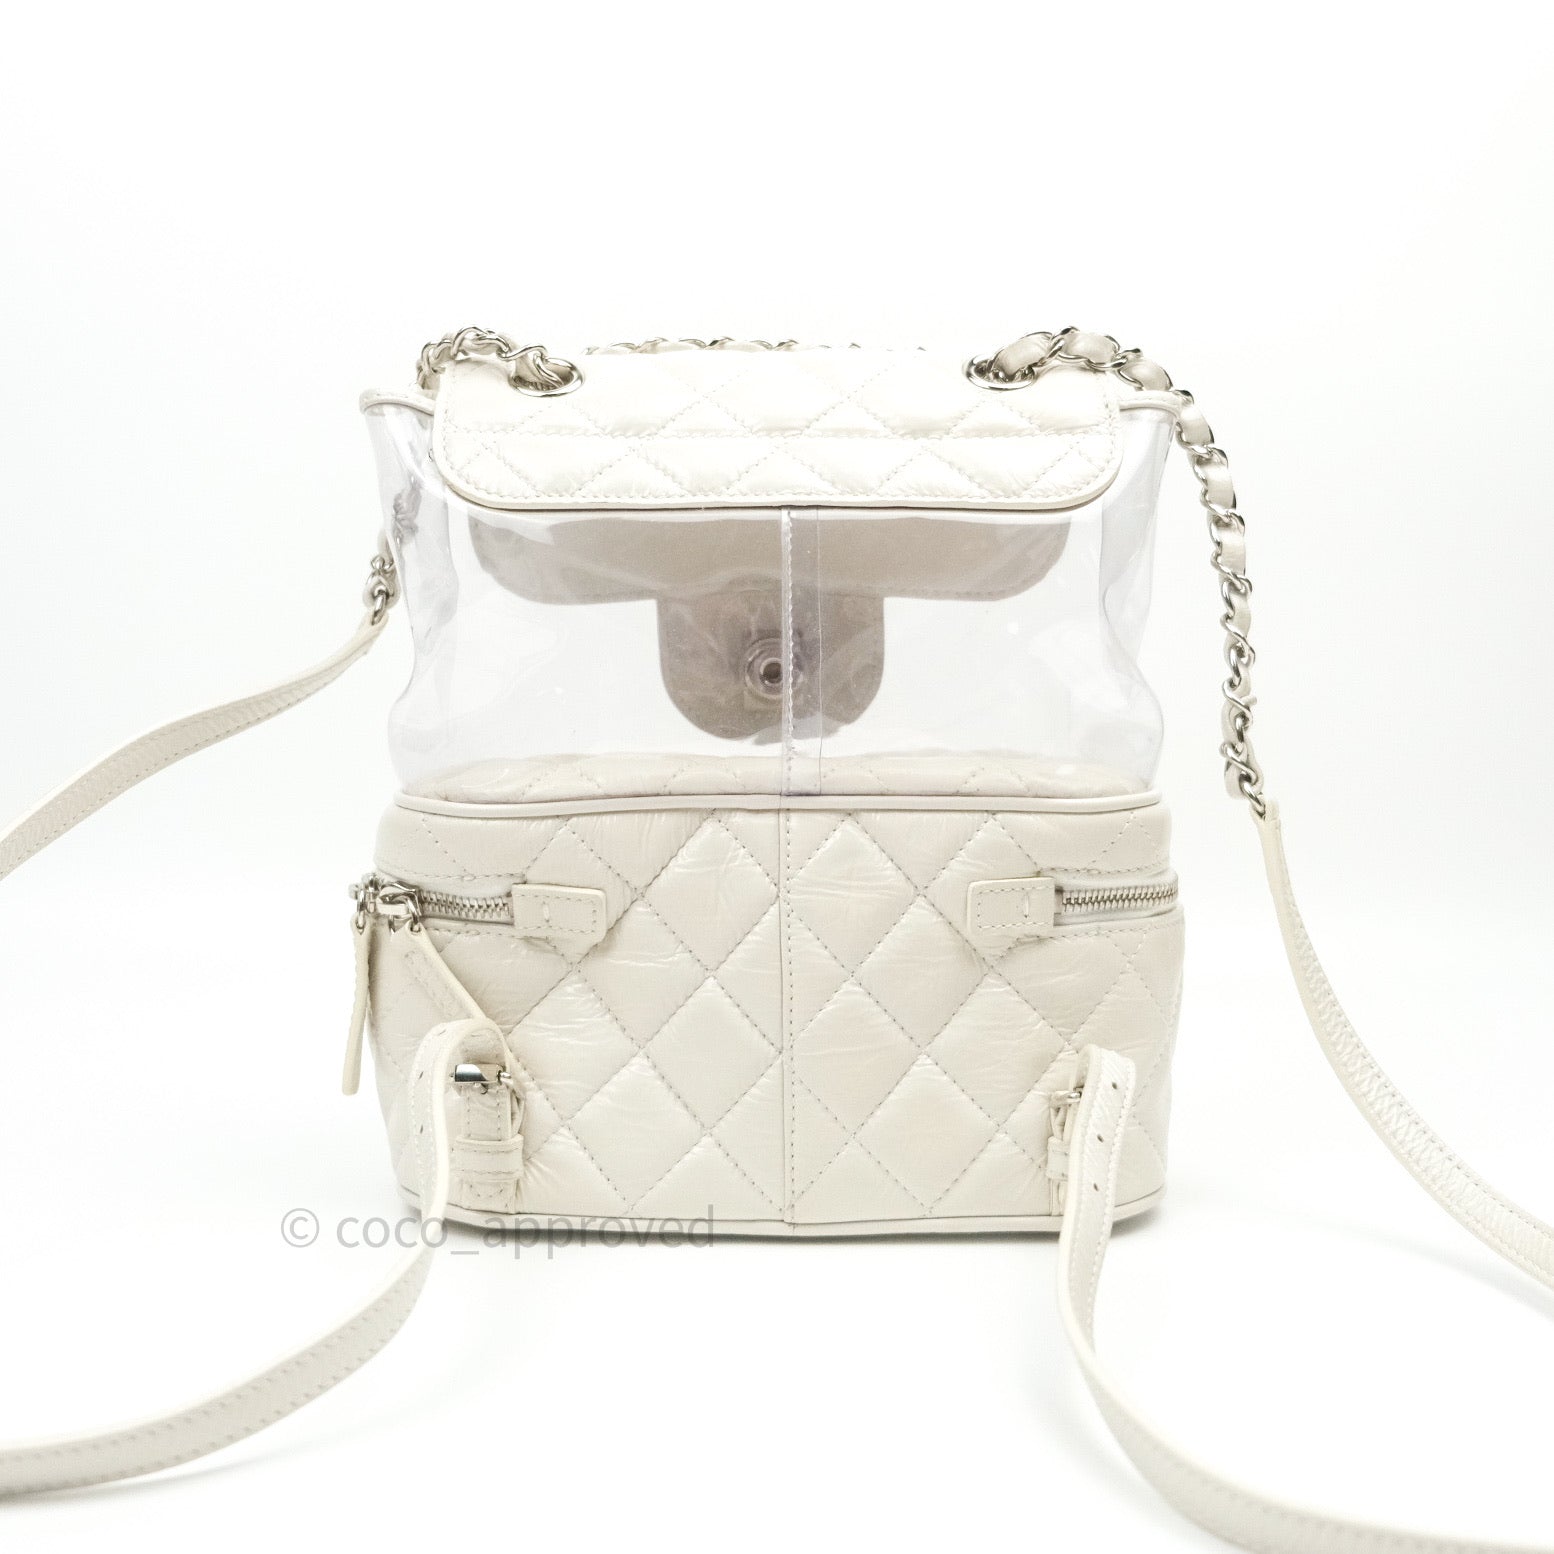 Chanel Crumpled Calfskin PVC Quilted Backpack White – Coco Approved Studio